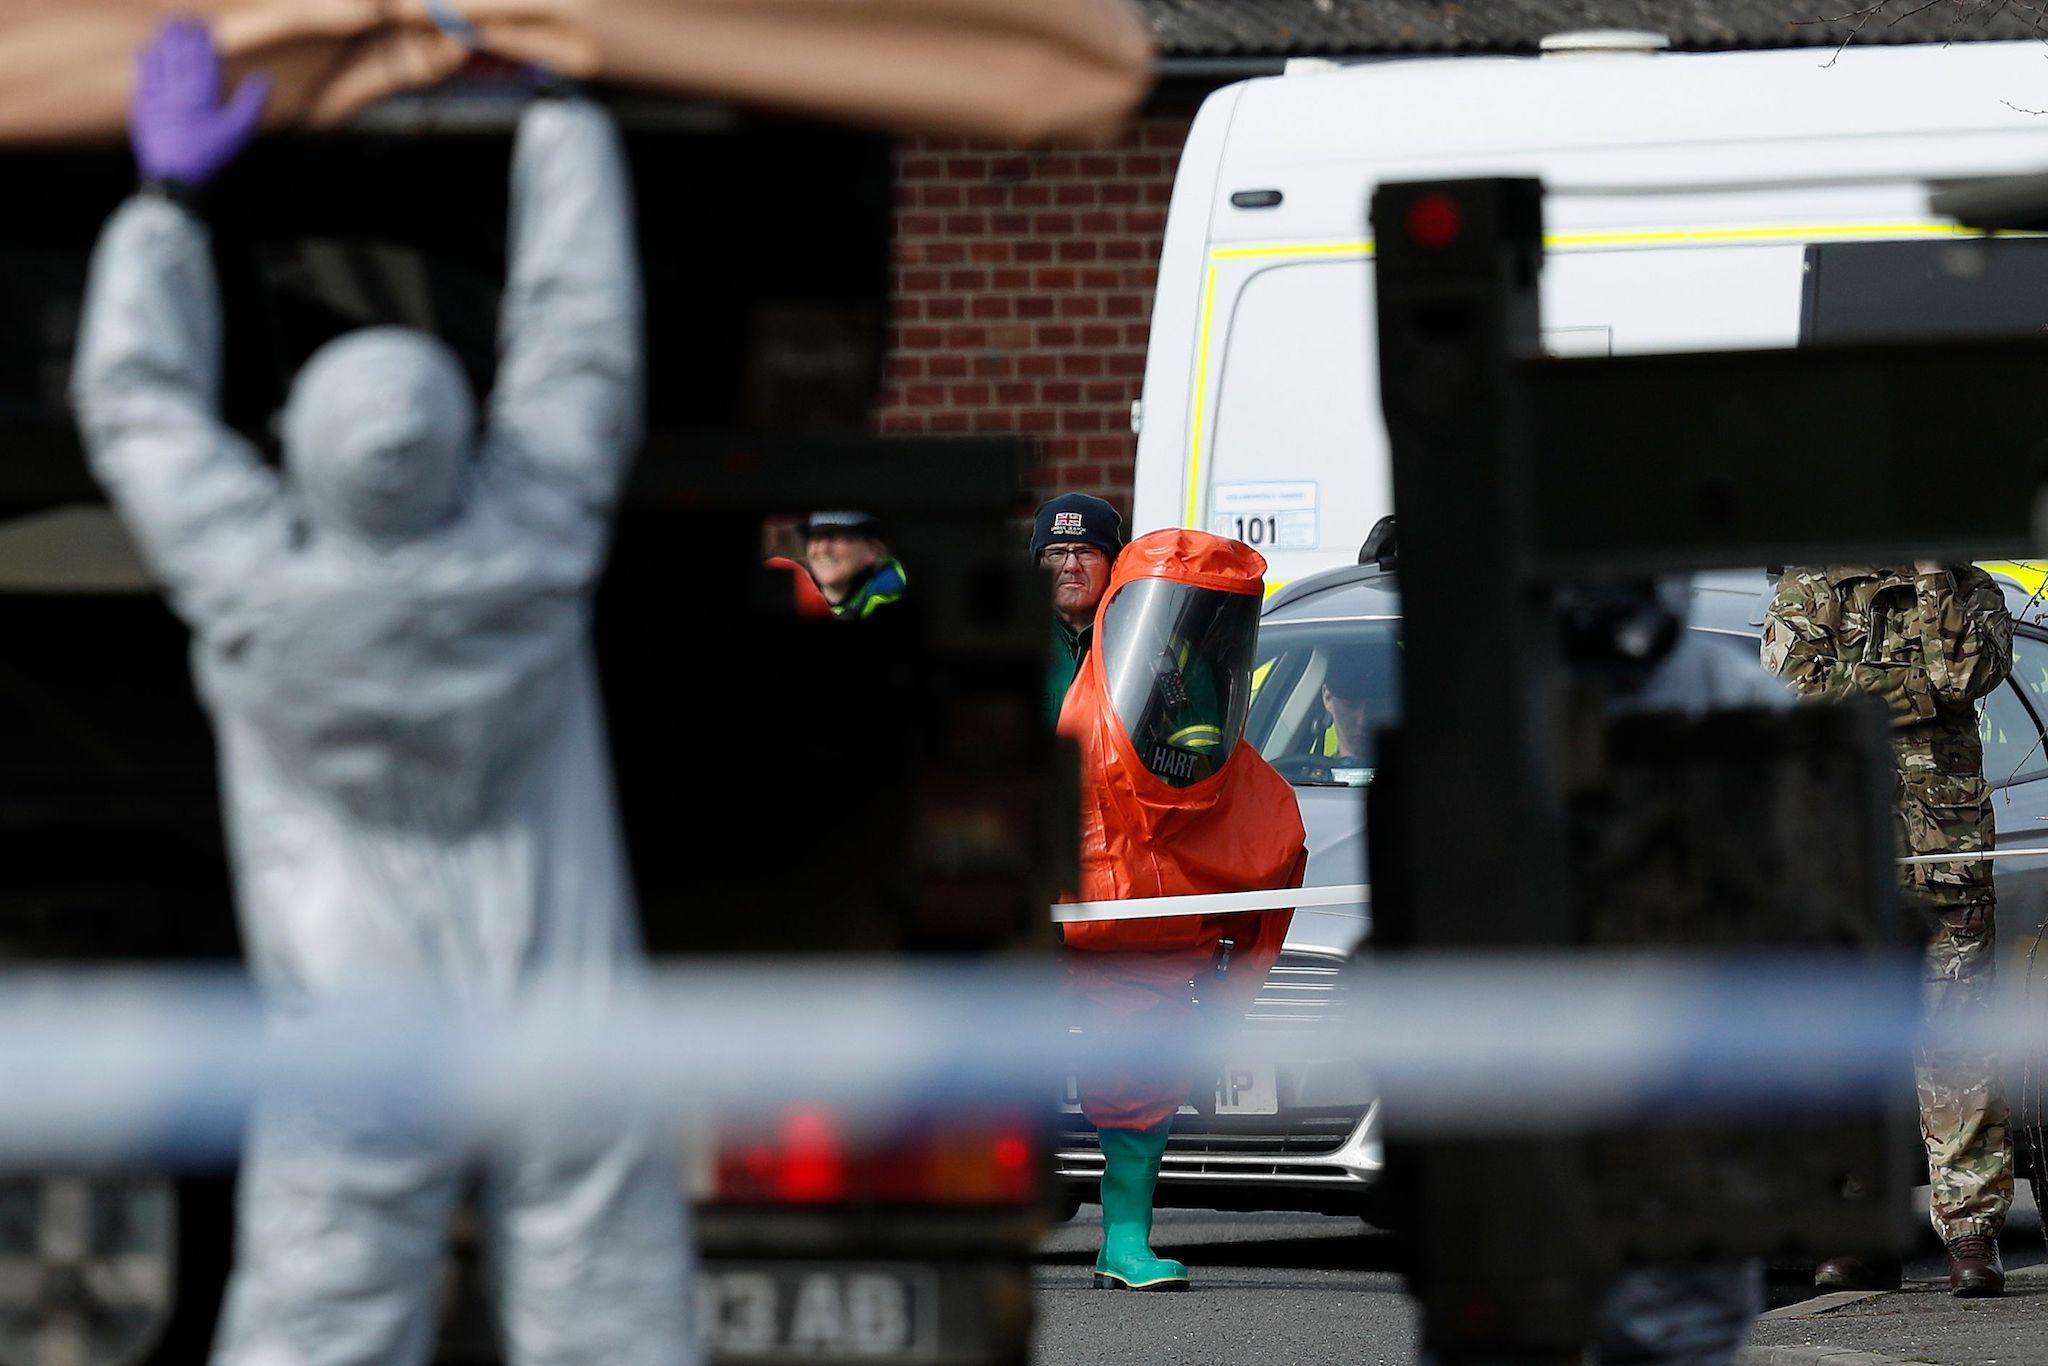 Novichok remains active long after it is used and people could be poisoned by picking things up, experts warn